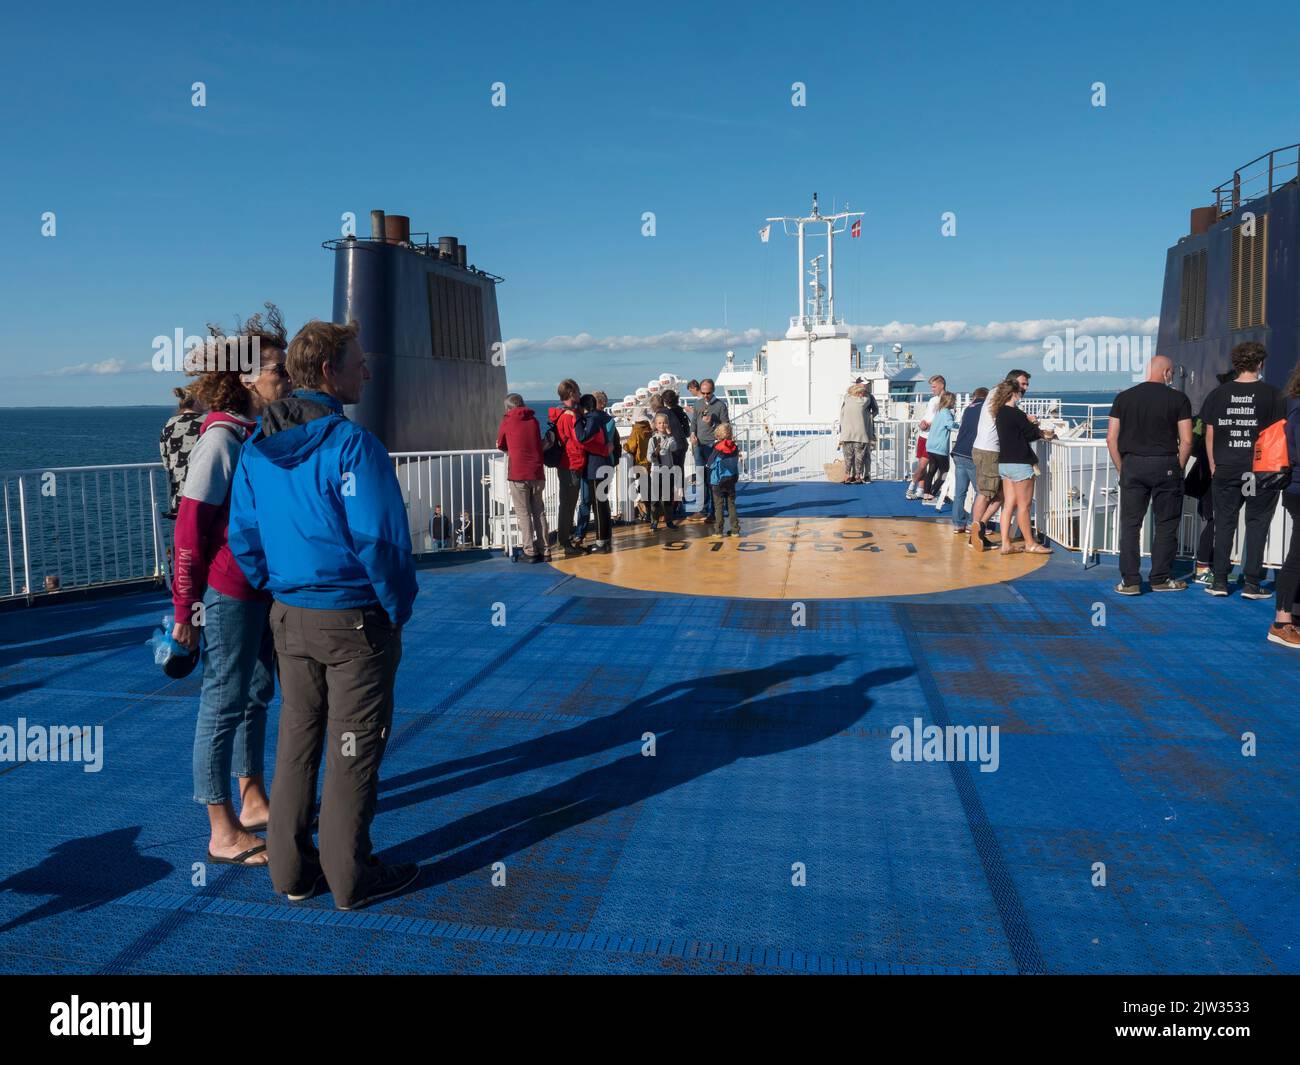 Rodbyhavn, Denmark, Agust 21, 2021: People enjoying the cruise and sun on the deck of the Scandlines Hybrid Ferry boat betweene Rodby - Puttgarden. Stock Photo